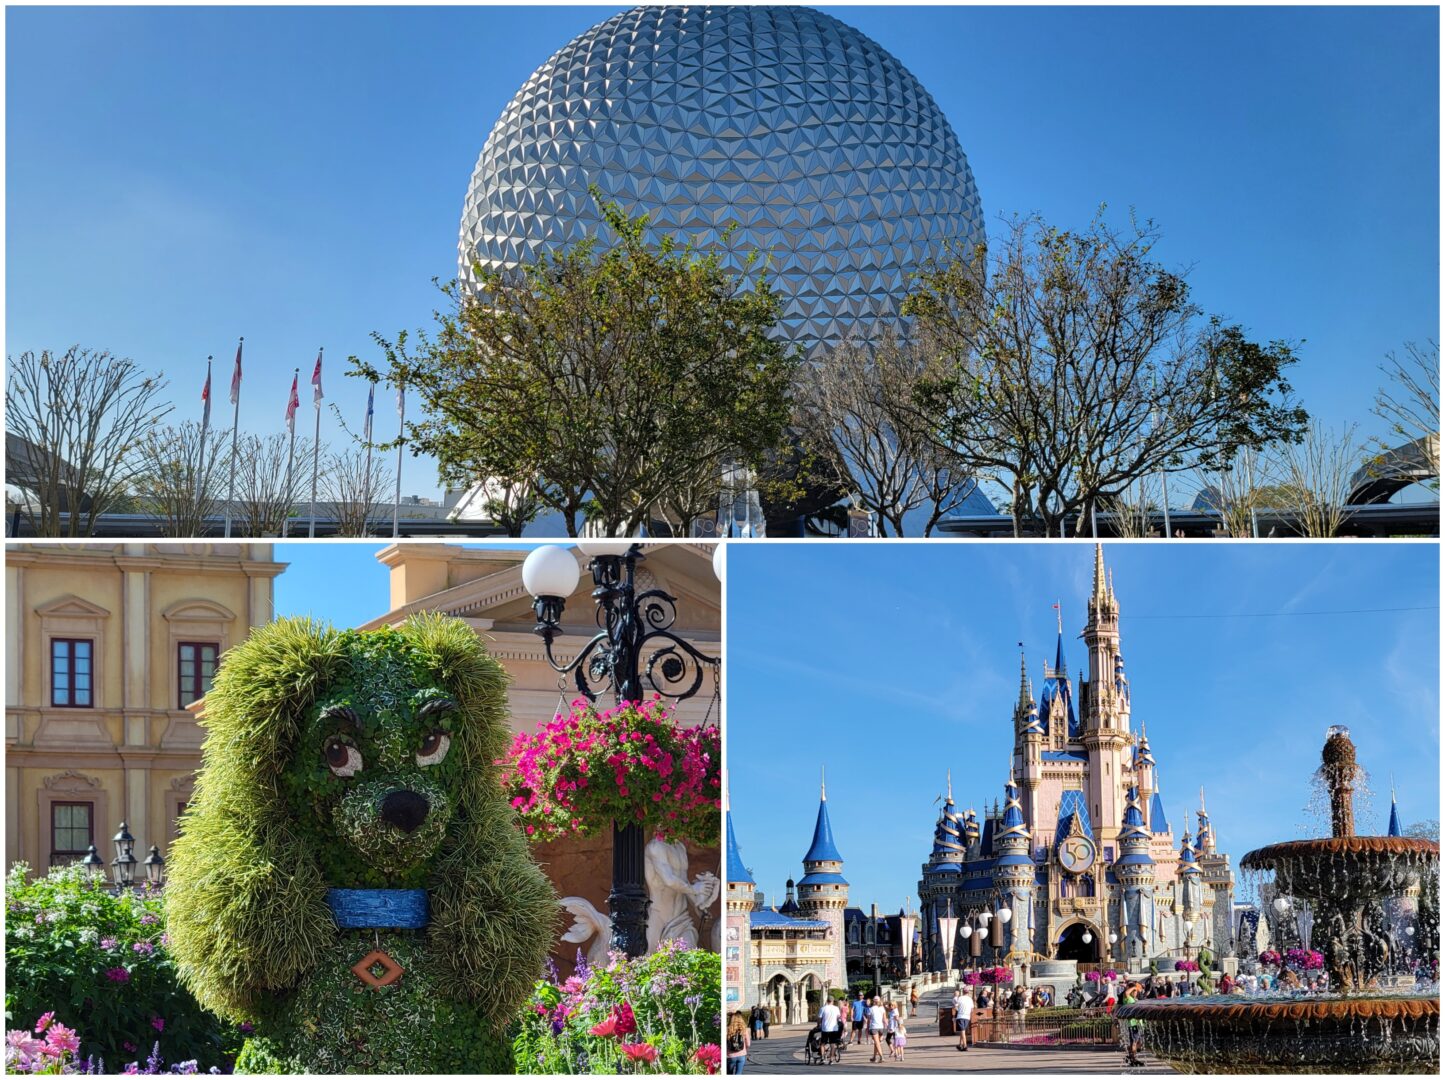 Disney News Highlights: Reedy Creek is No More, First Look at Merchandise and Topiaries for Epcot’s Flower & Garden Festival, Spaceship Earth New Light Show